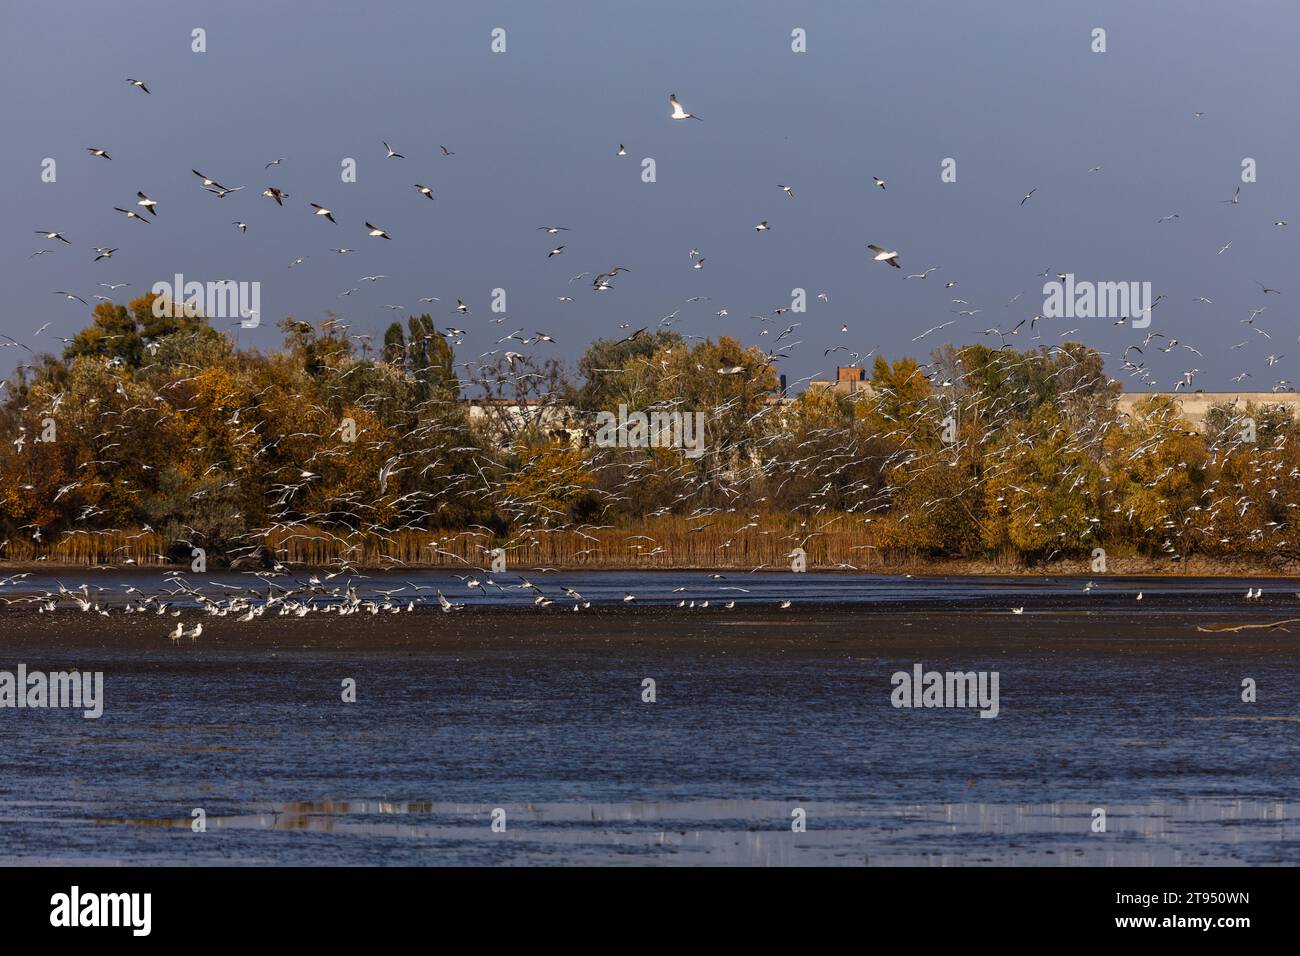 Many river gulls hunt fish in lakes, rivers, and canals. Seagulls fly over the water. Seagulls gracefully glide over the water's surface, their wings Stock Photo